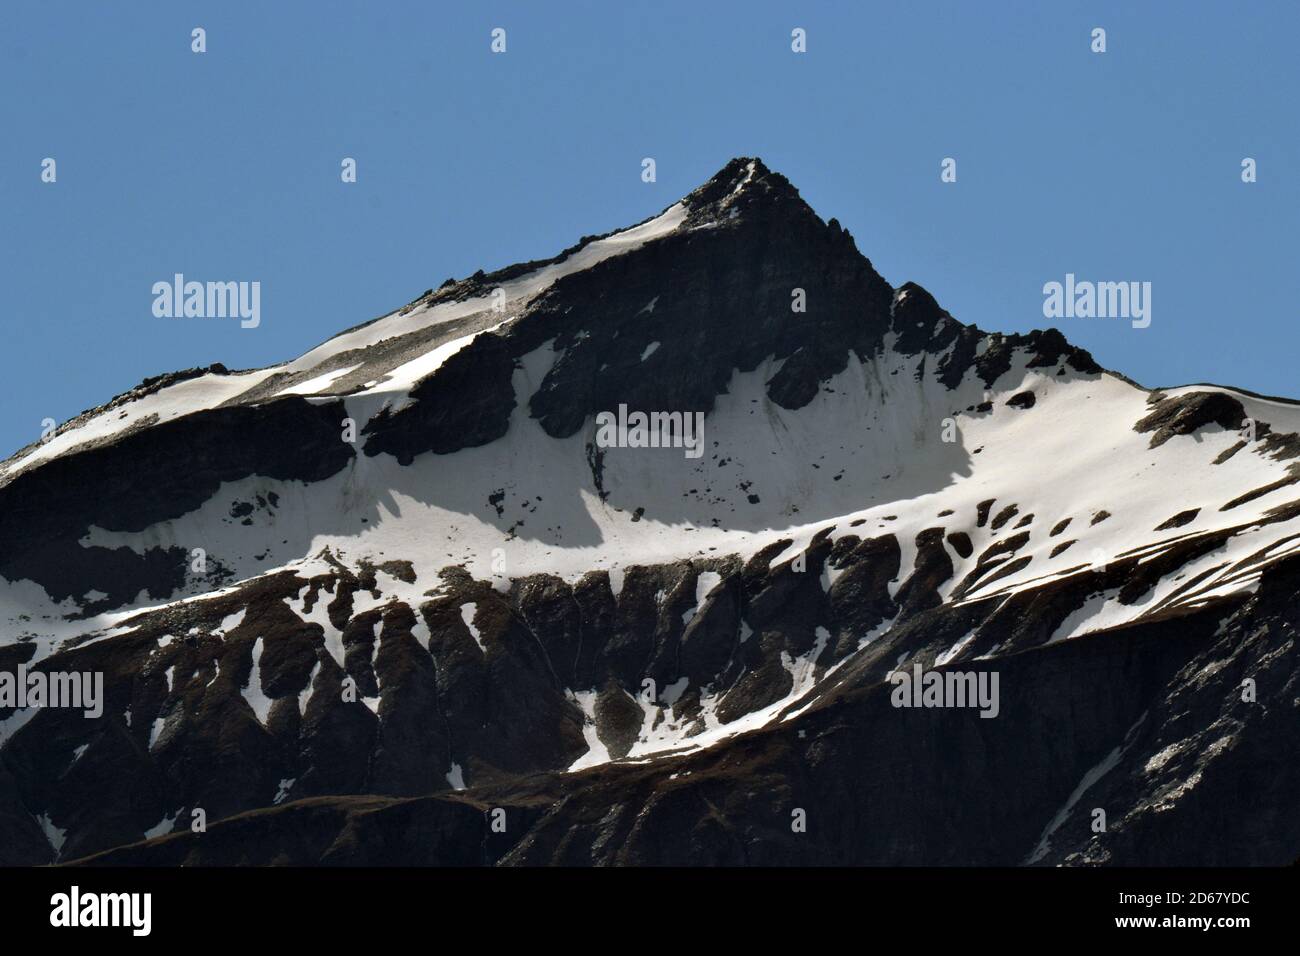 Summer snow coverage of Mount Aspiring, South Island, New Zealand Stock Photo